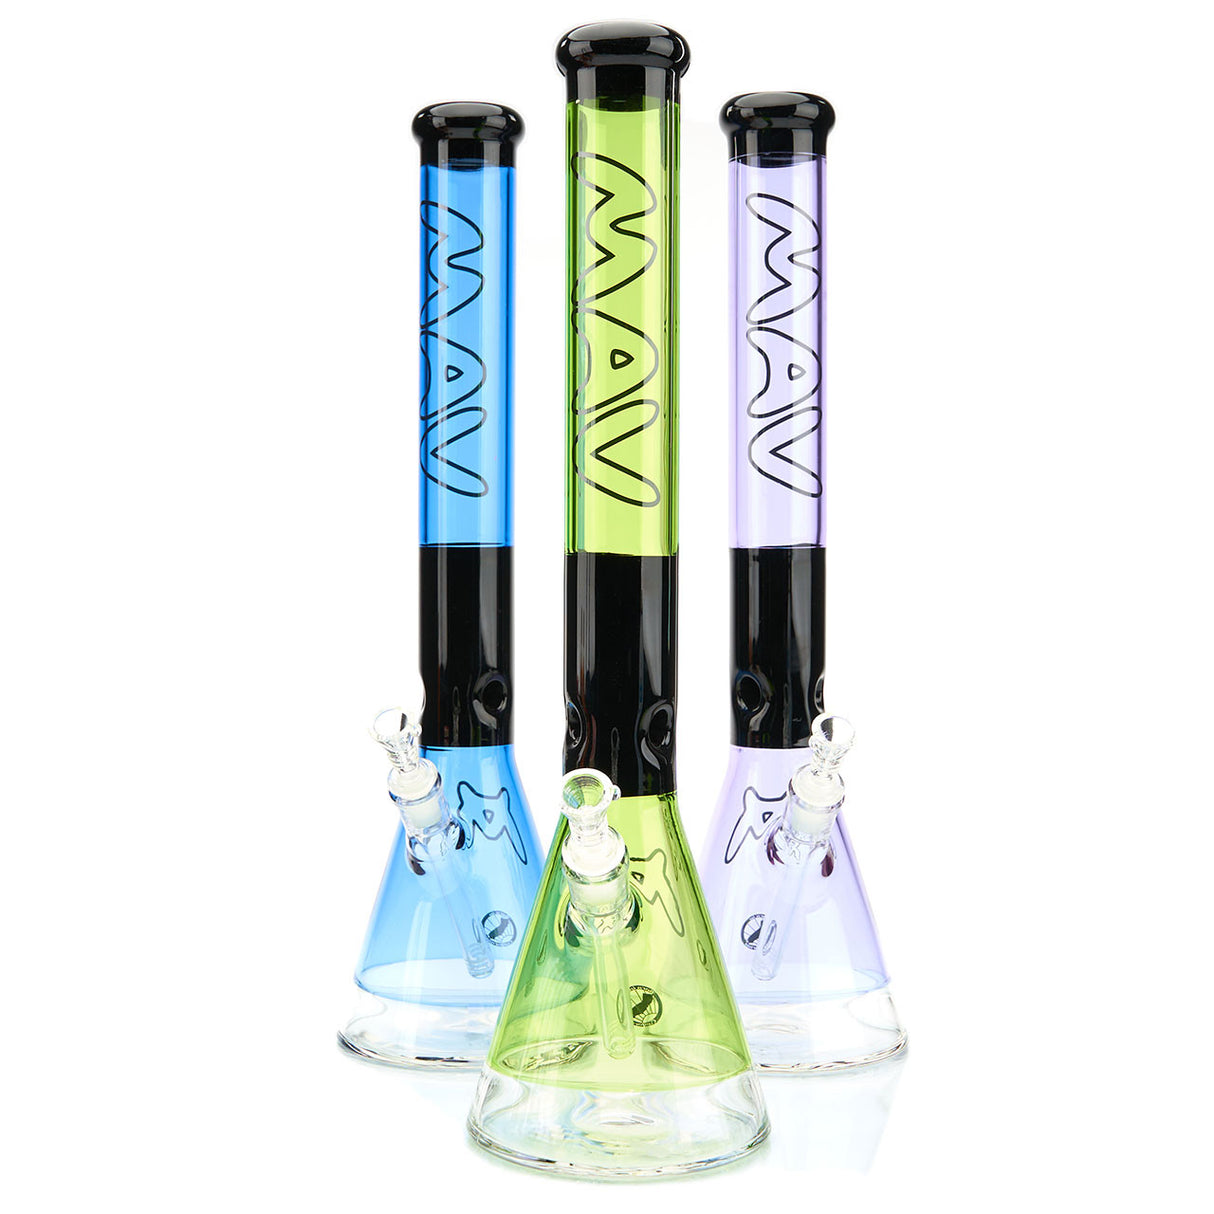 MAV Glass 18-inch beaker straight tube water pipe with two tone color group image with ooze & black, blue & black, and purple & black